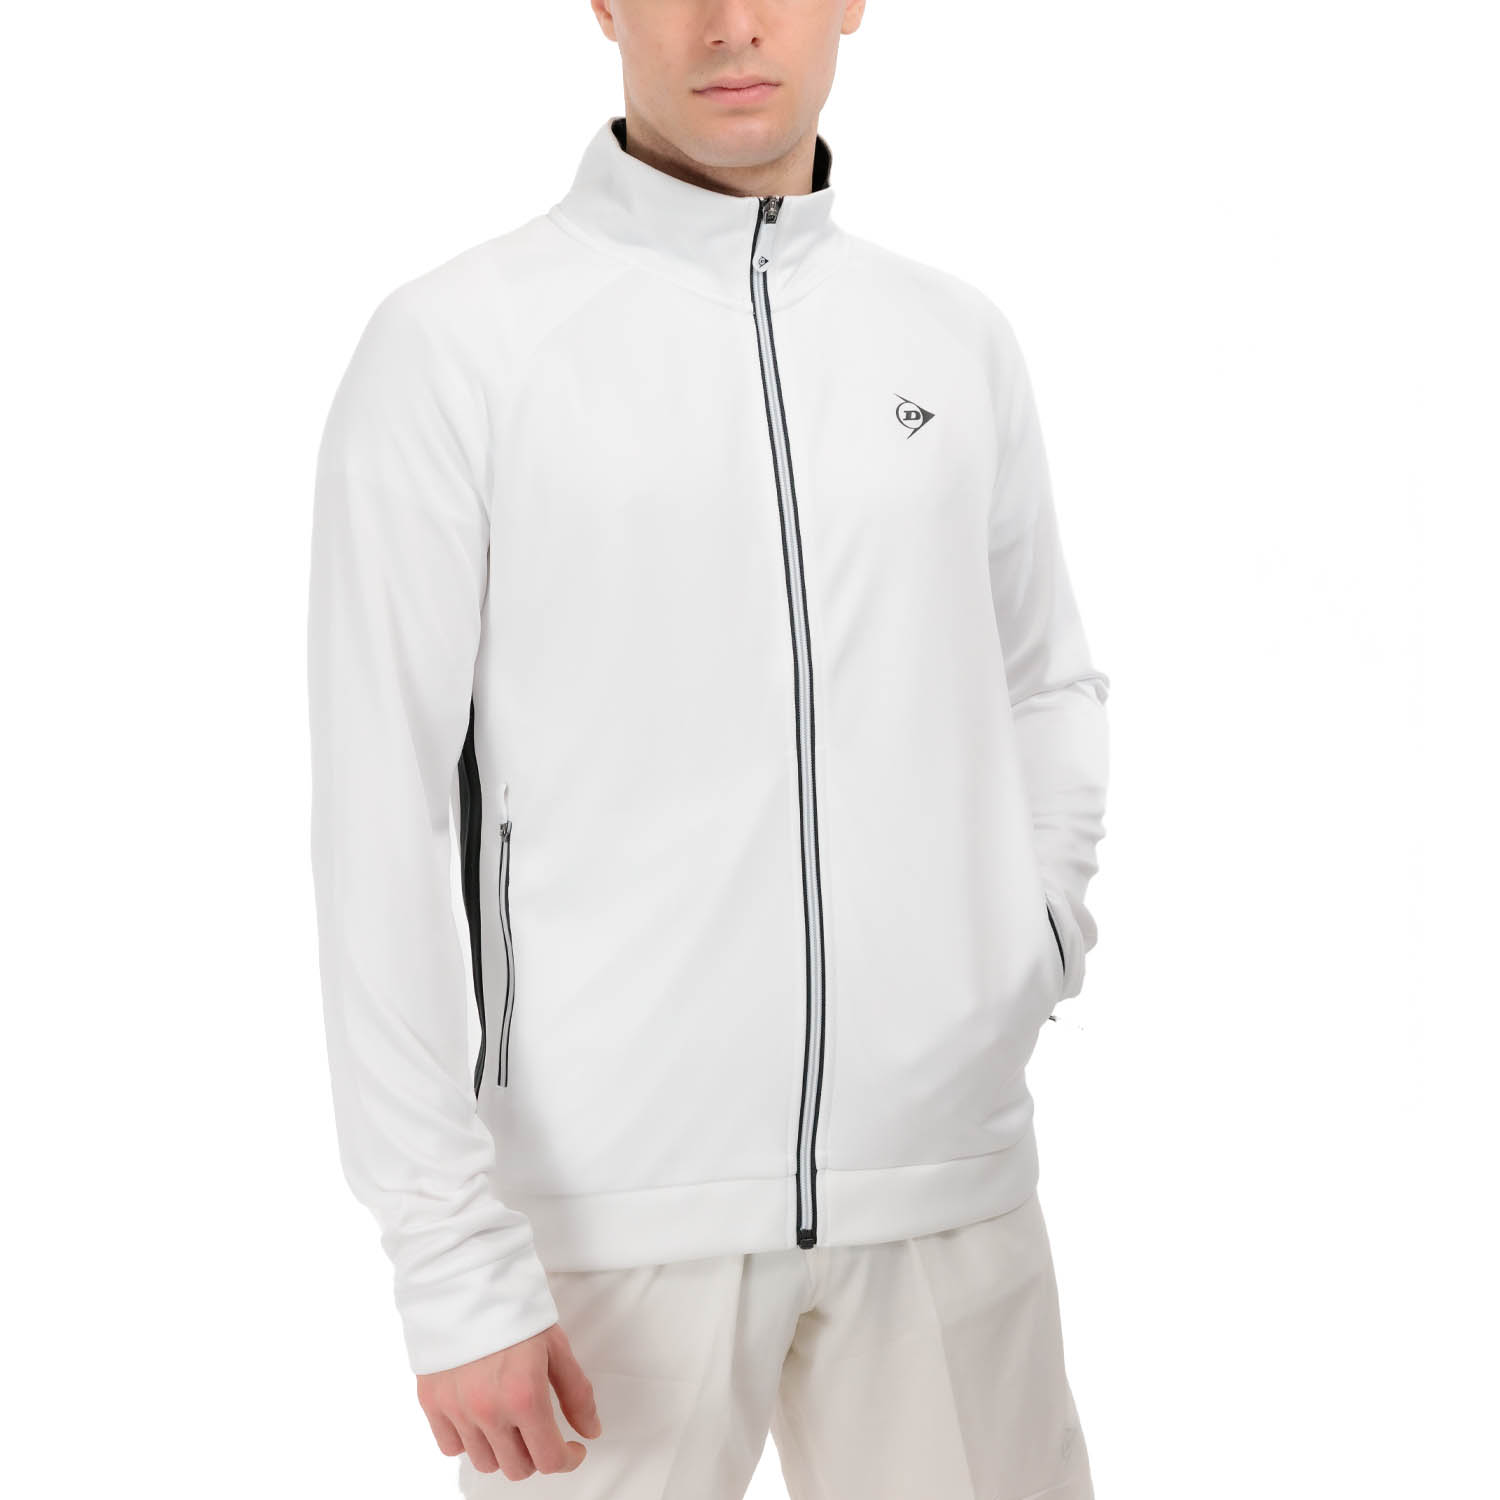 Dunlop Club Knitted Jacket - White/Black